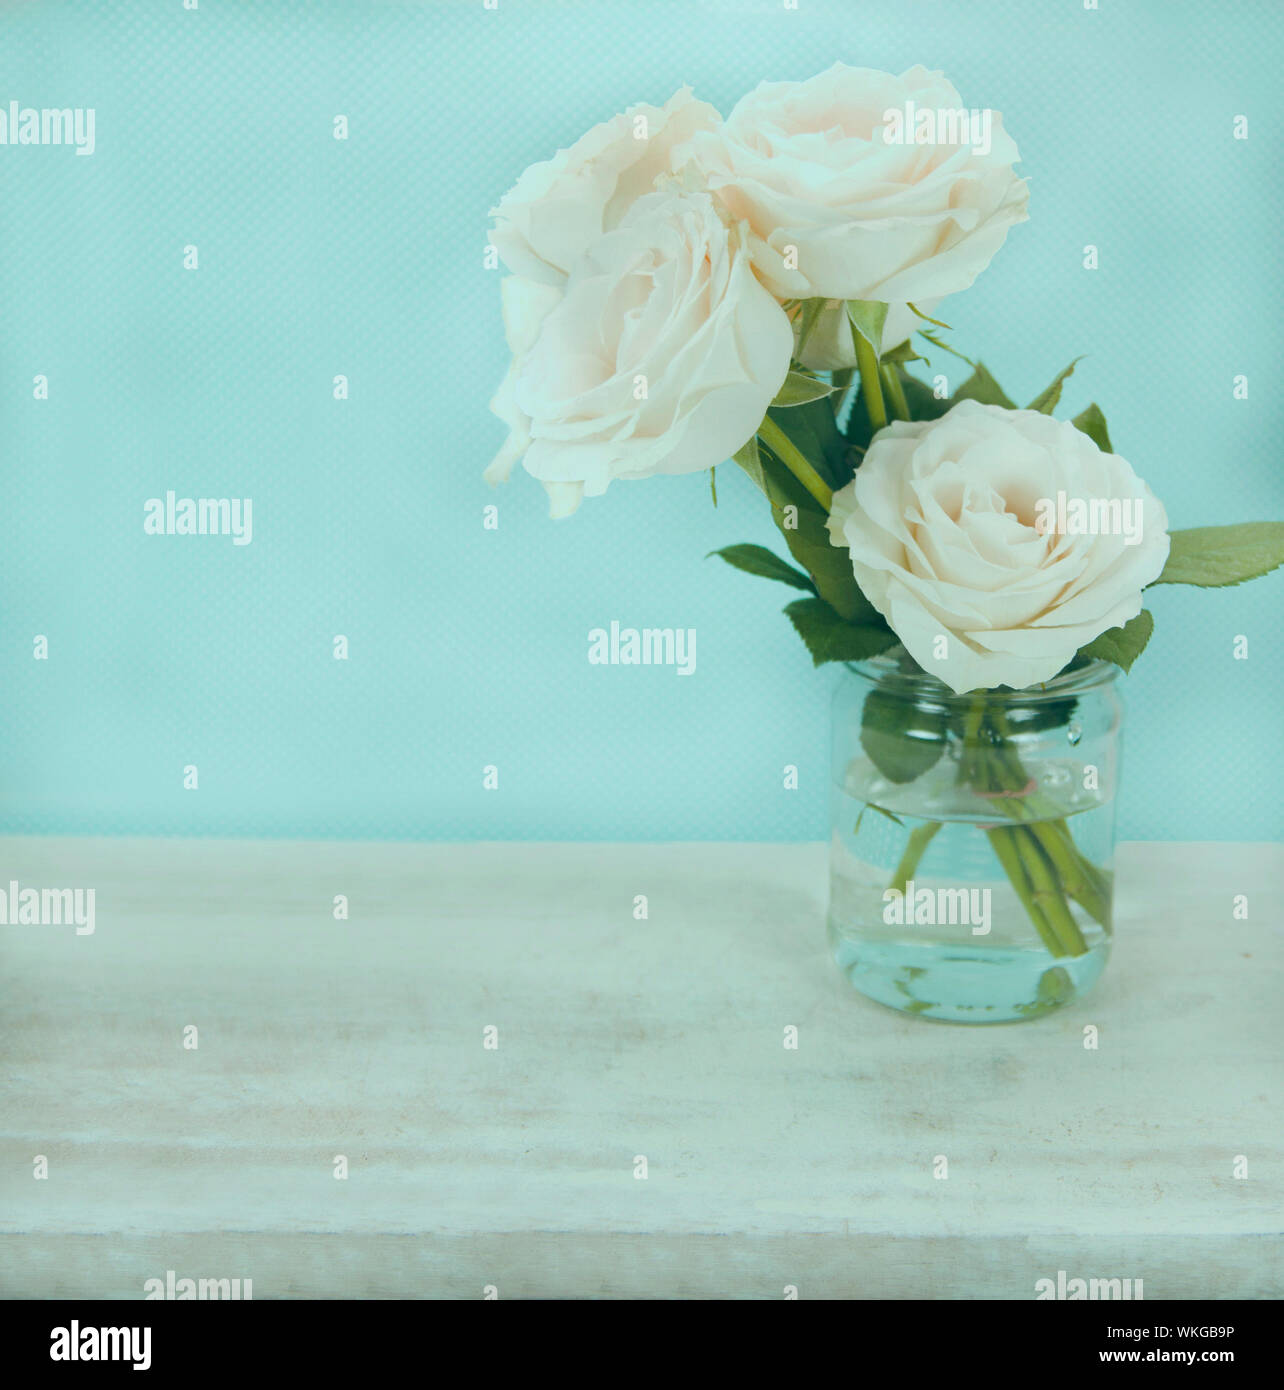 Beautiful white roses on blue background with copy space. Stock Photo